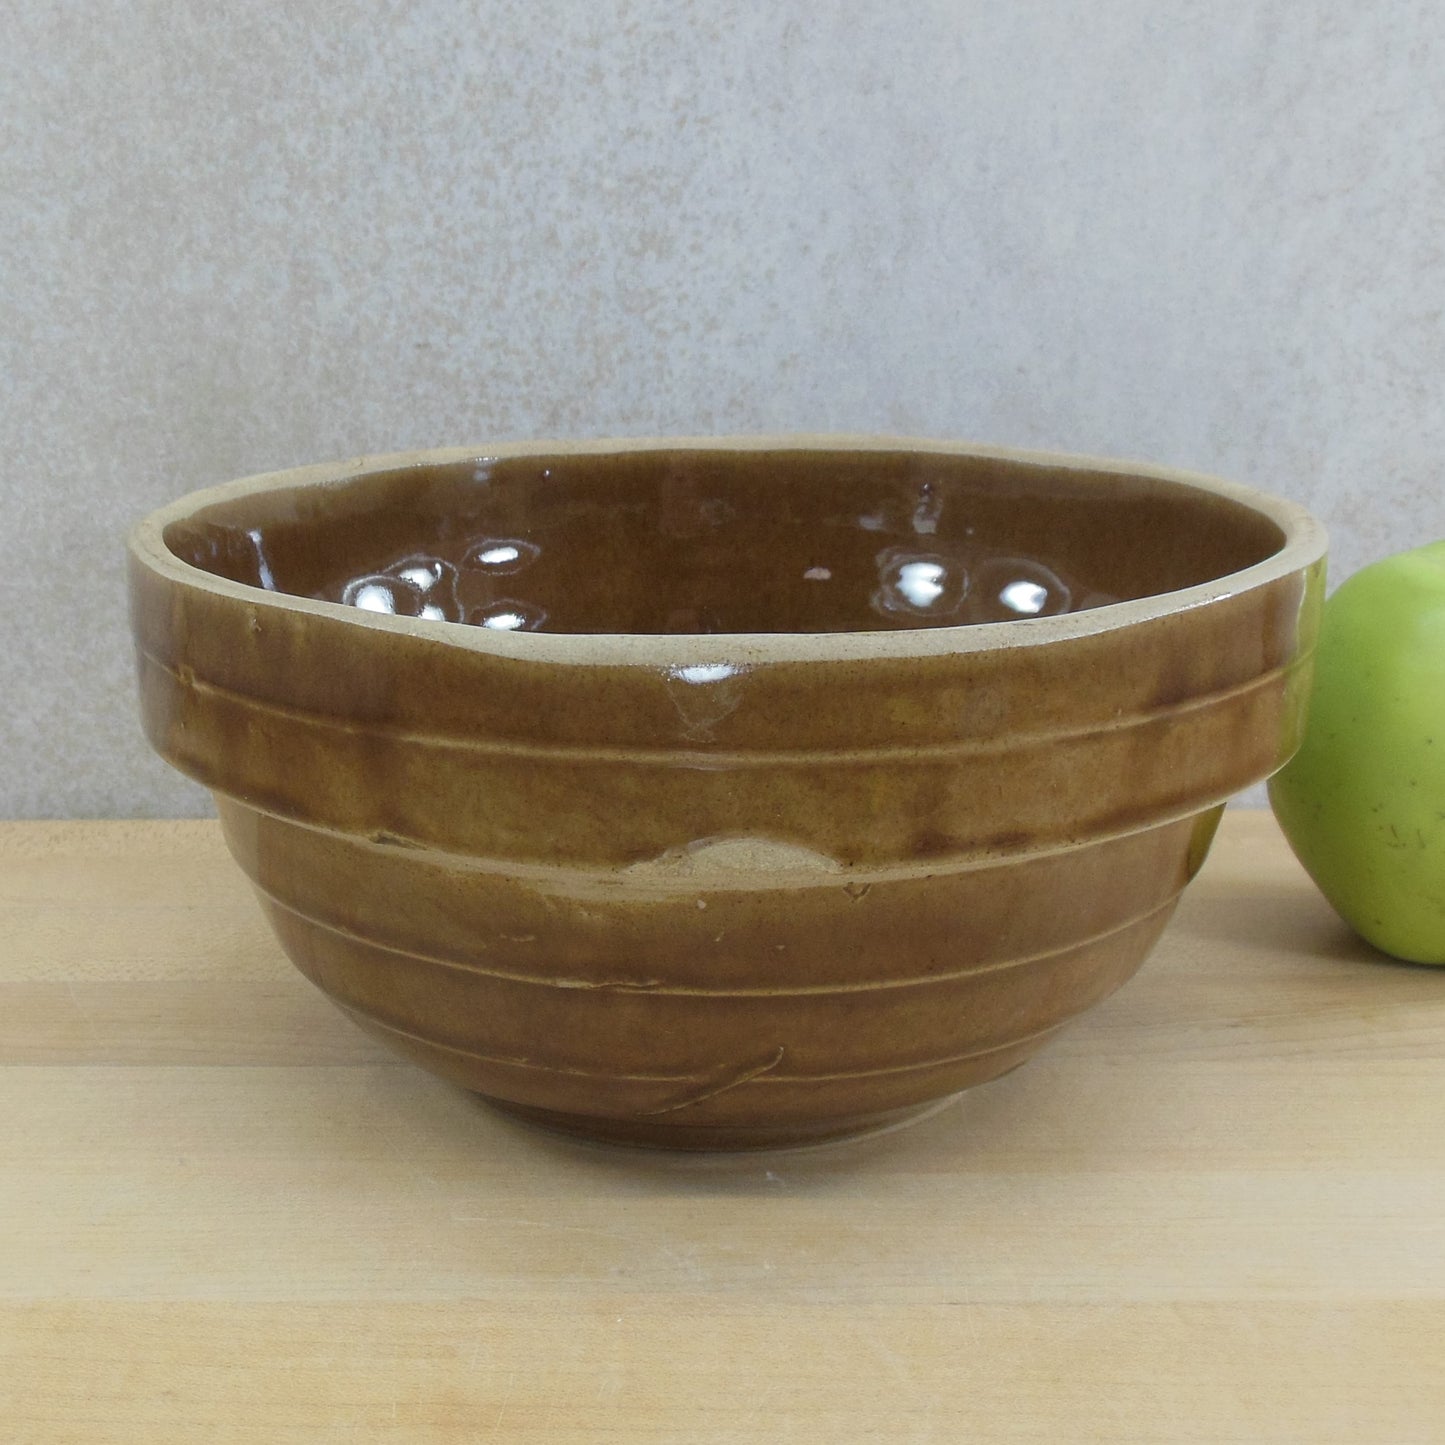 Unbranded Ringed USA Stoneware Pottery Mixing Bowl Brown 8" 8 IN.